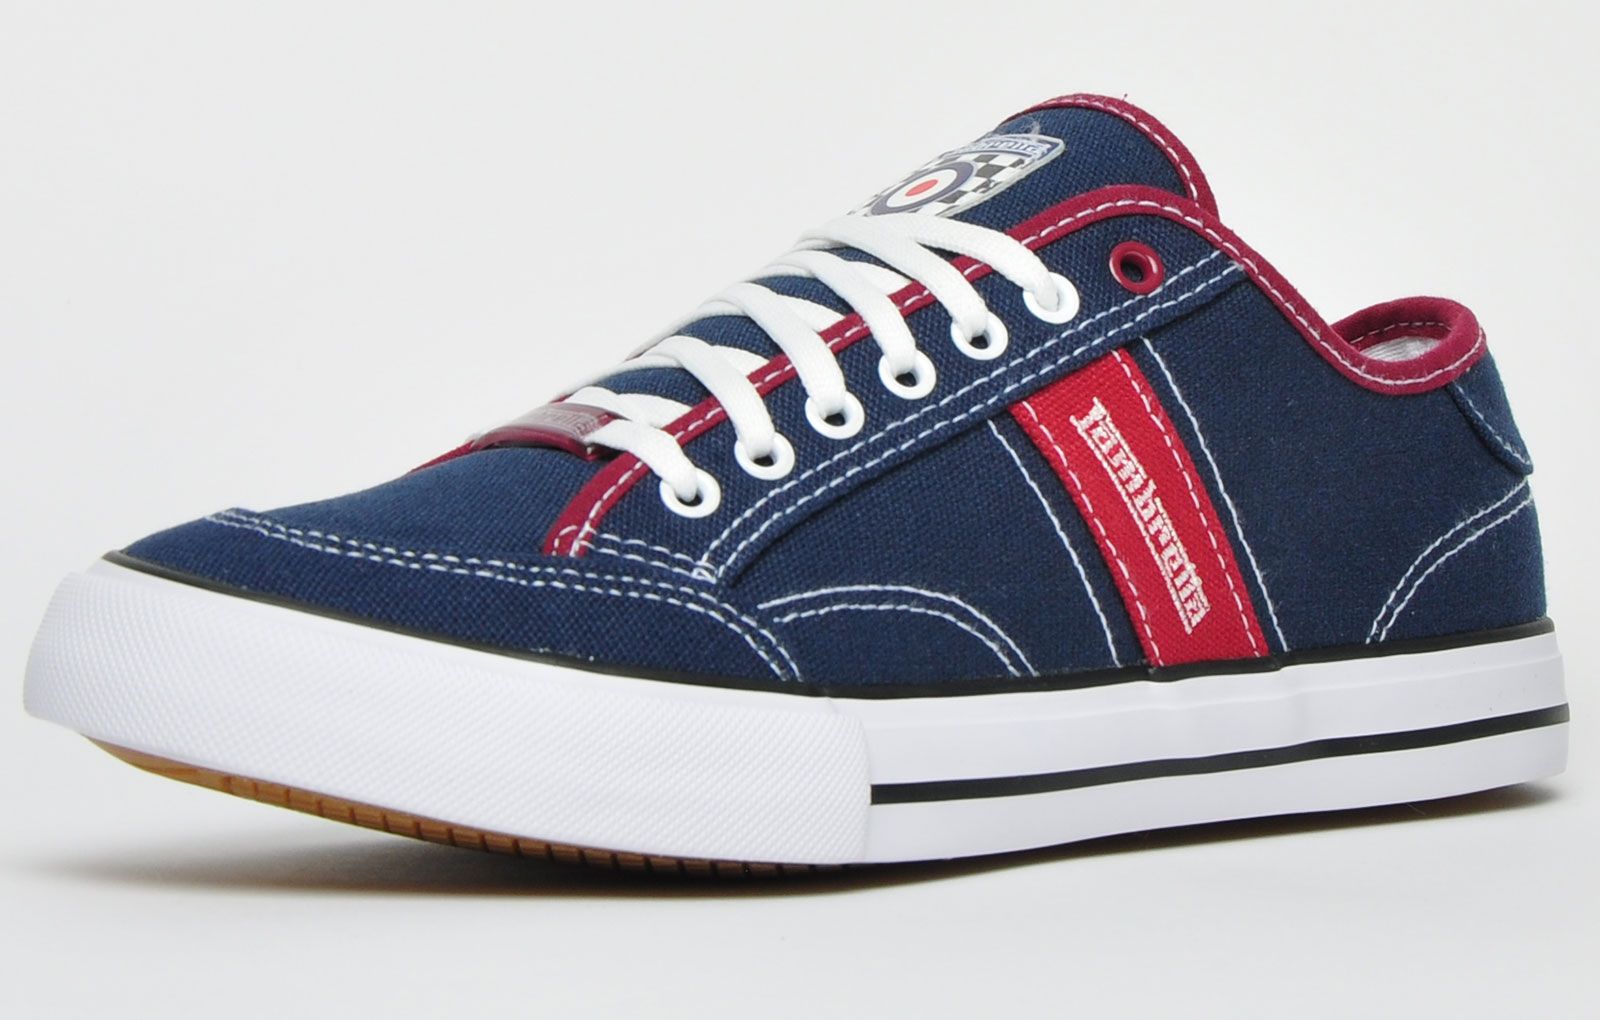 <p>Brighten up your trainer collection with the Lambretta Classic Mexico. Featuring a robust canvas upper with sophisticated detailing throughout, this new twist on the classic Lambretta Mexico court silhouette will make you stand out from the crowd while its classic Lambretta looks deliver street-ready style and comfort for all day wear.</p><br> <p class=